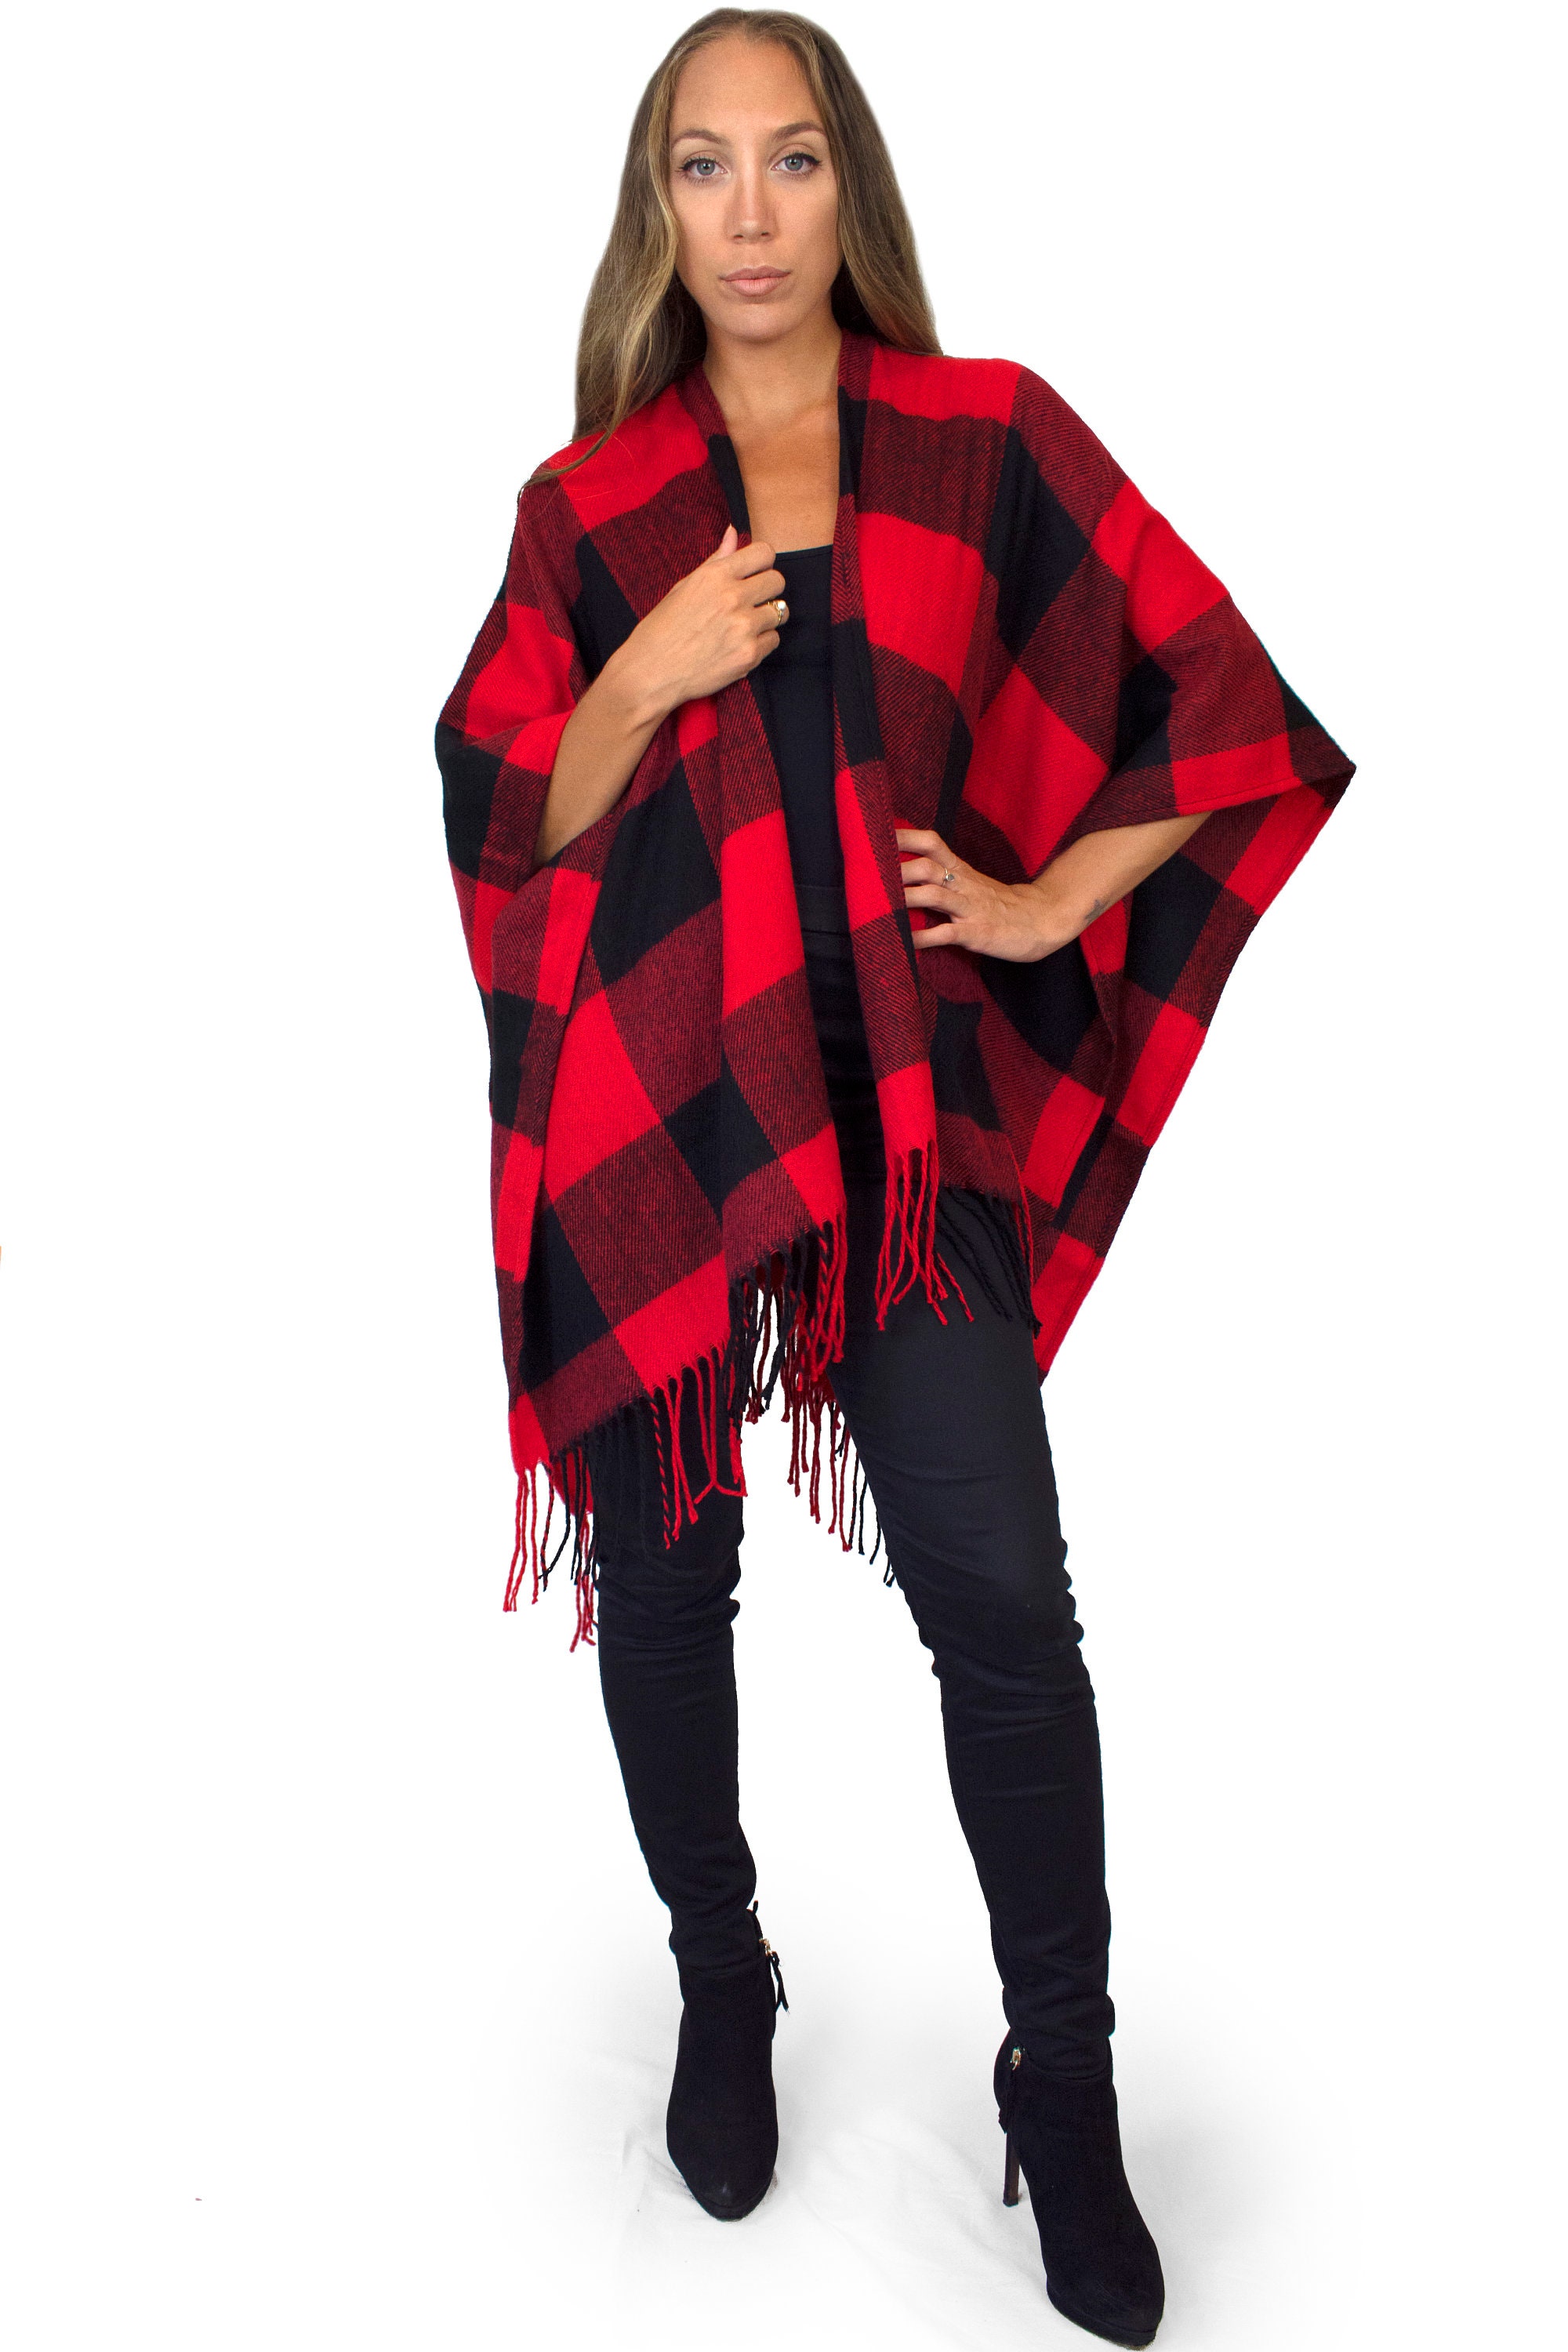 Woven Knit Buffalo Plaid Poncho Red Black Flannel Checkered | Etsy